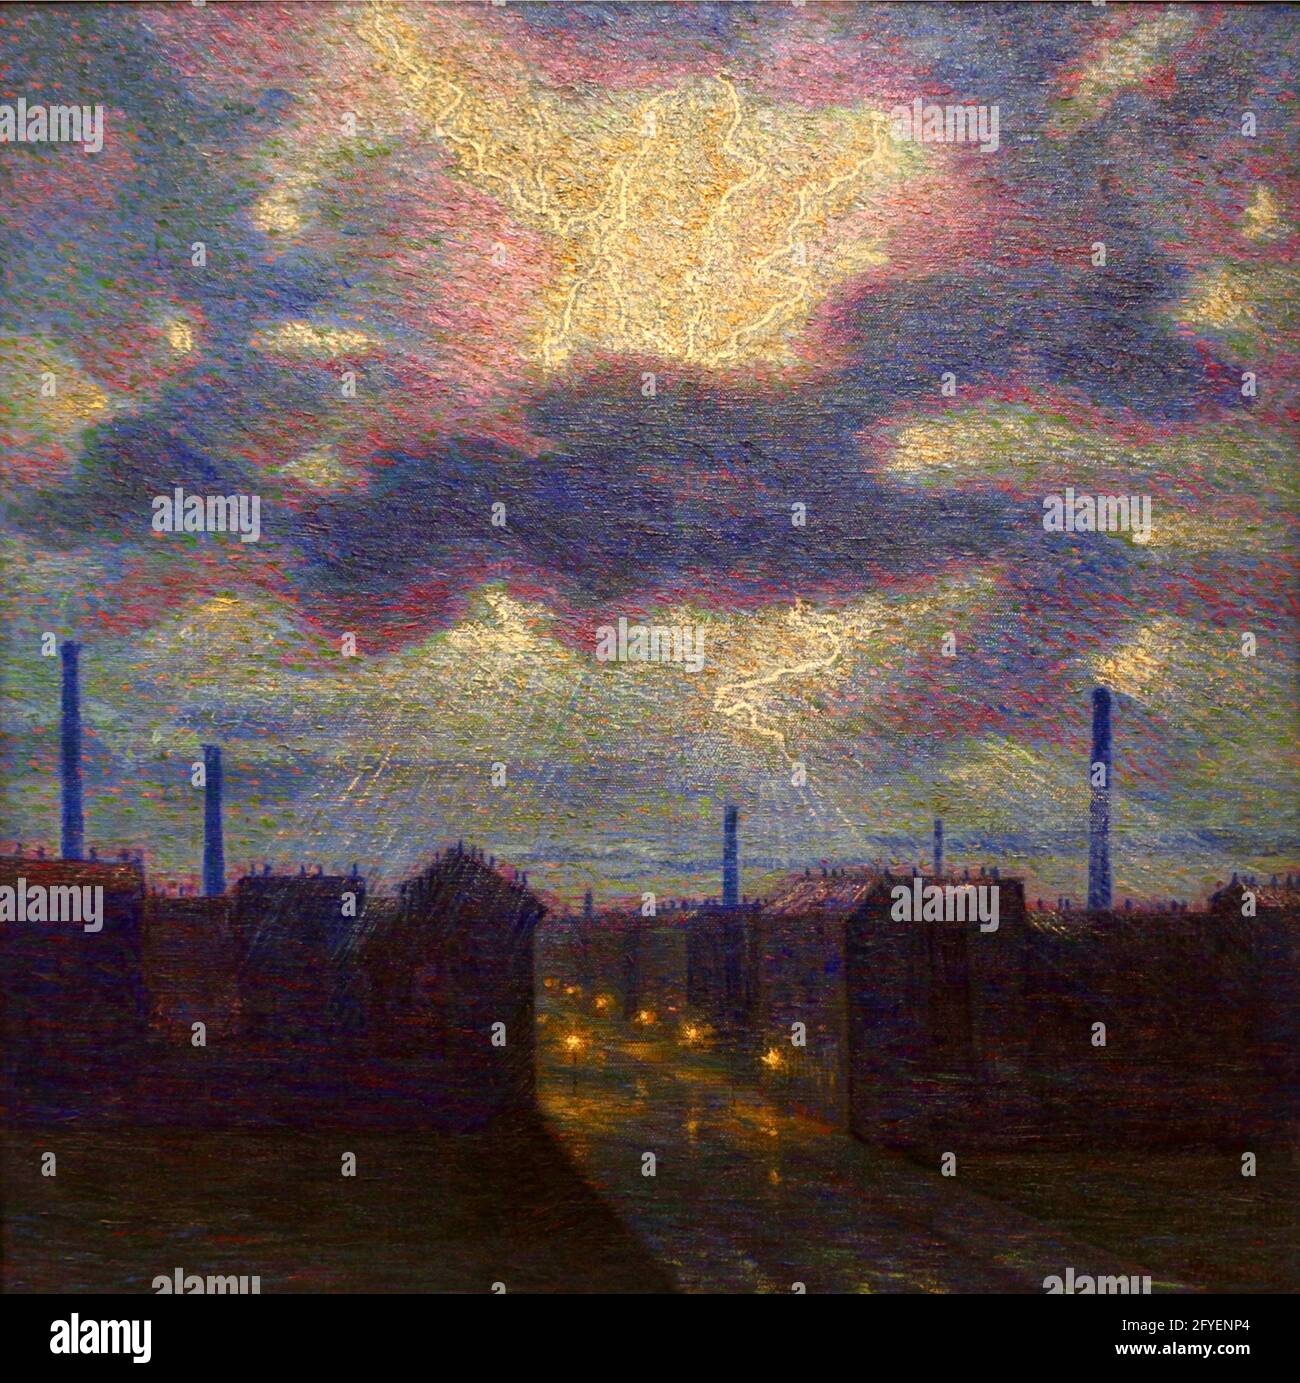 Luigi Russolo artwork entitled Lightning Flashes or Lampi. Milan city-scape in the midst of an electric storm. Stock Photo